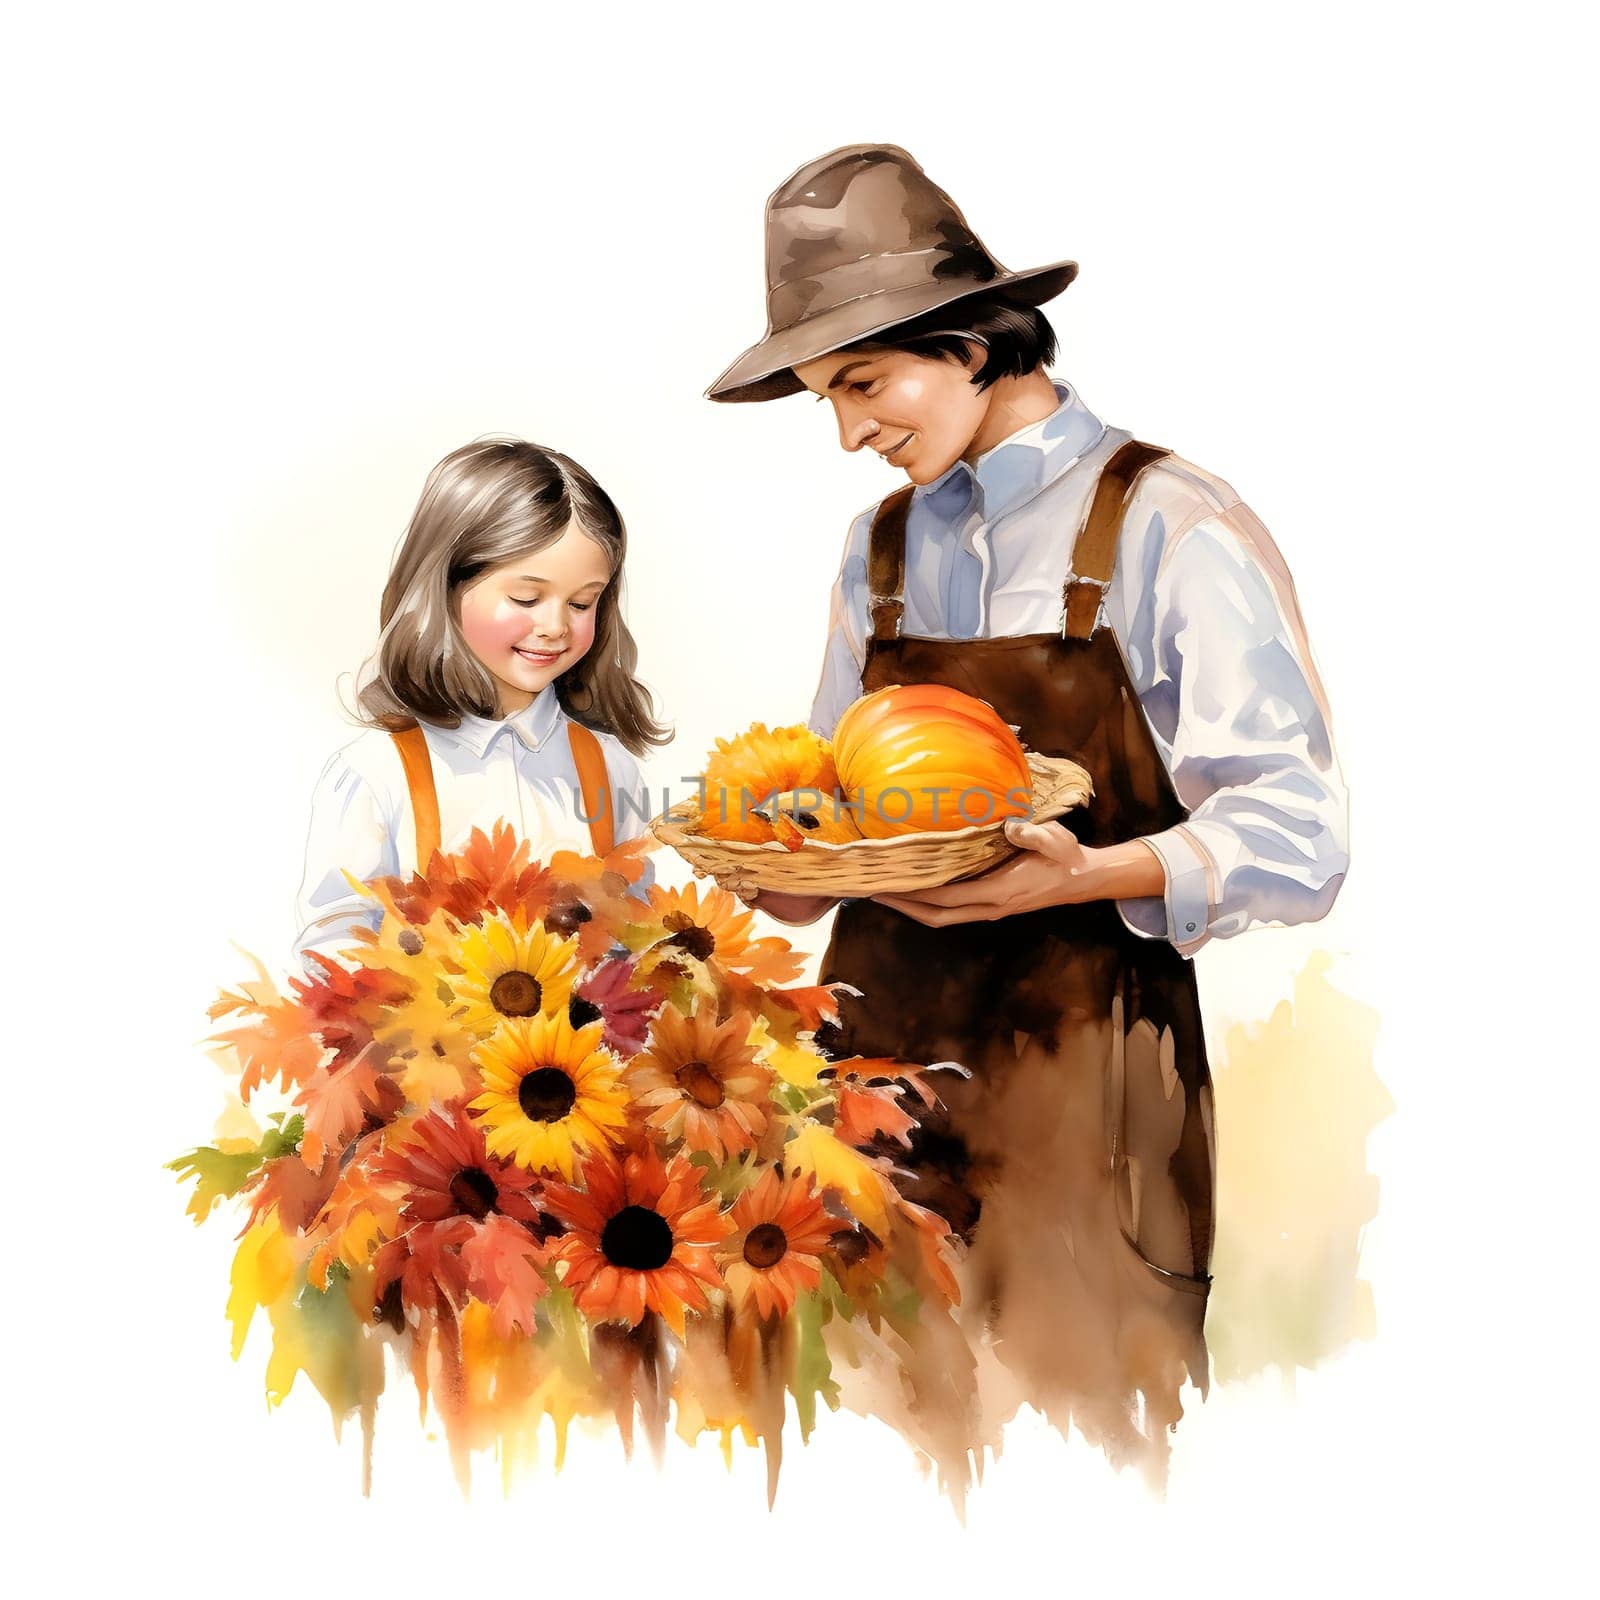 Image mother holding pumpkins and daughter with a bouquet of yellow flowers on a white background painted in paint, watercolor. Thanksgiving for the harvest. by ThemesS